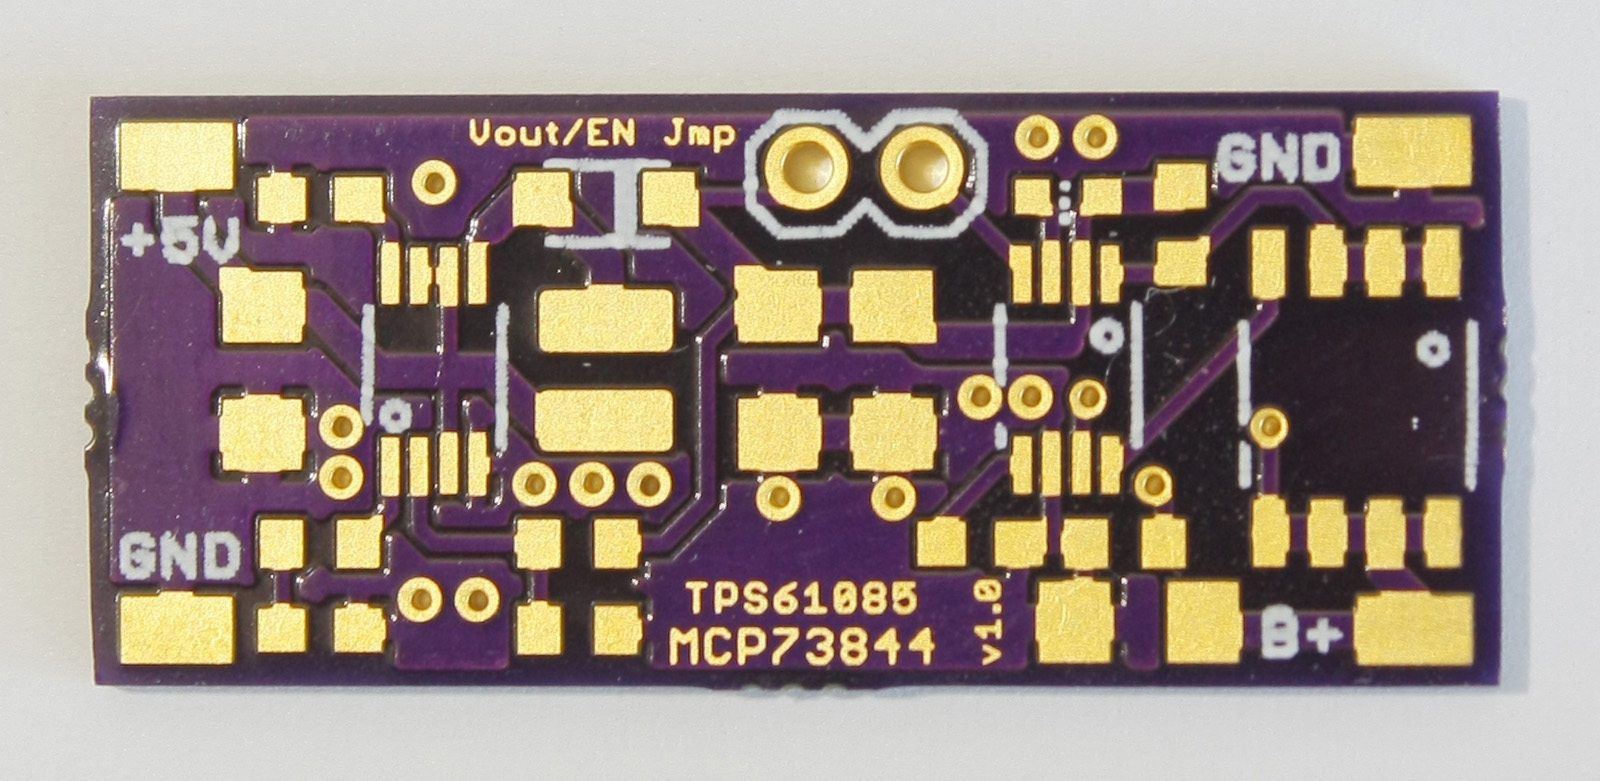 Top of unpopulated PCB